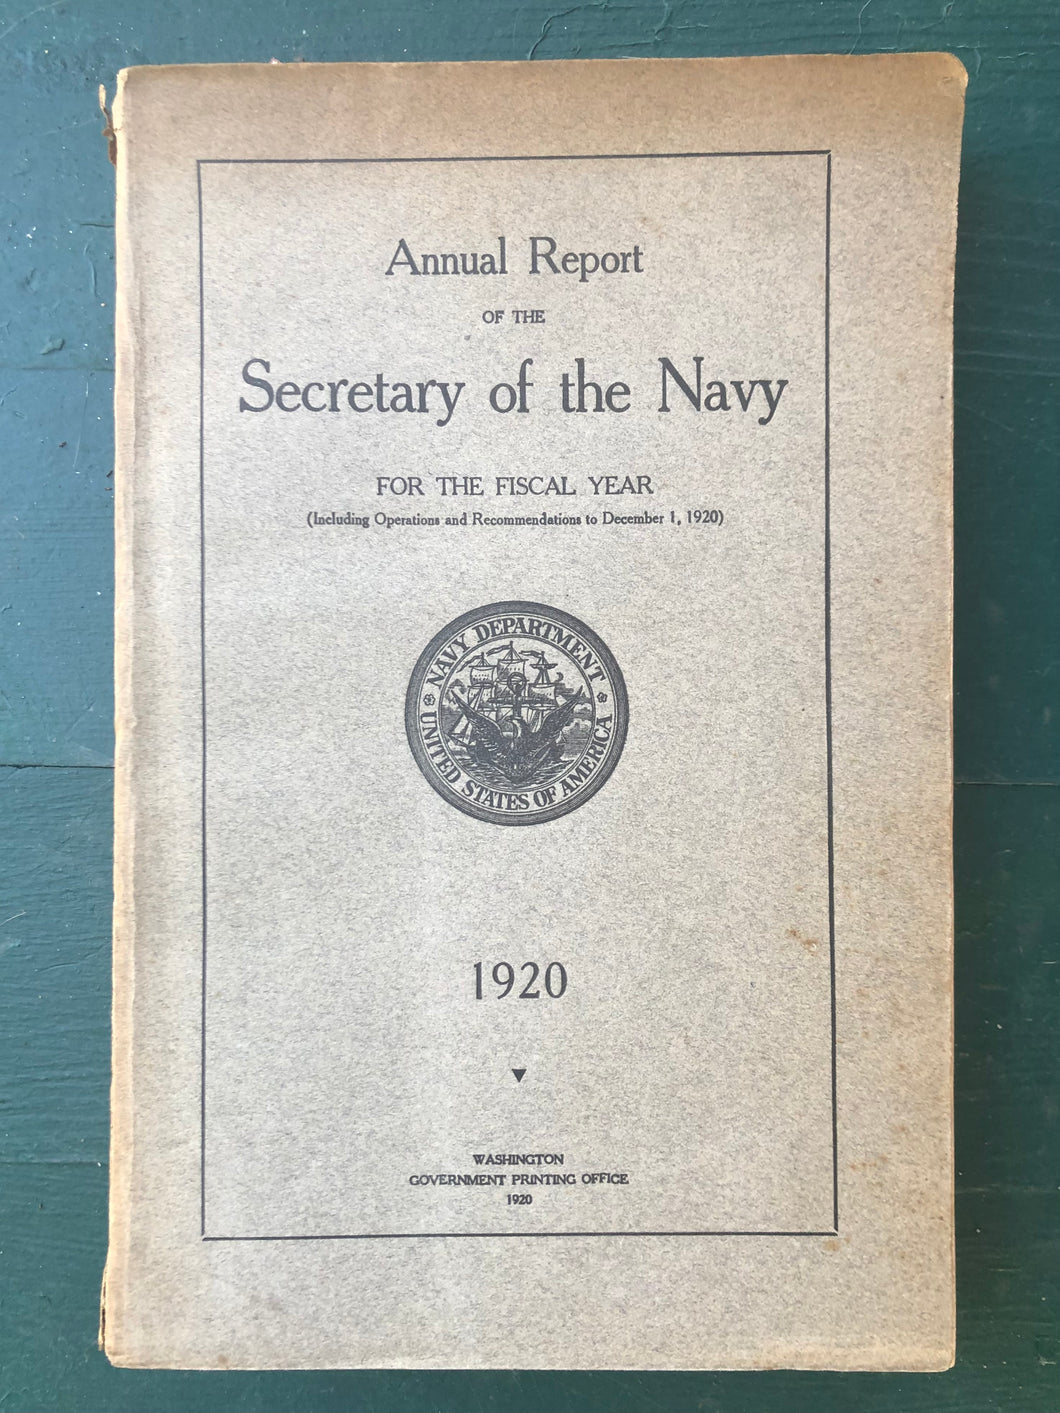 Annual Report of the Secretary of the Navy for the Fiscal Year 1920